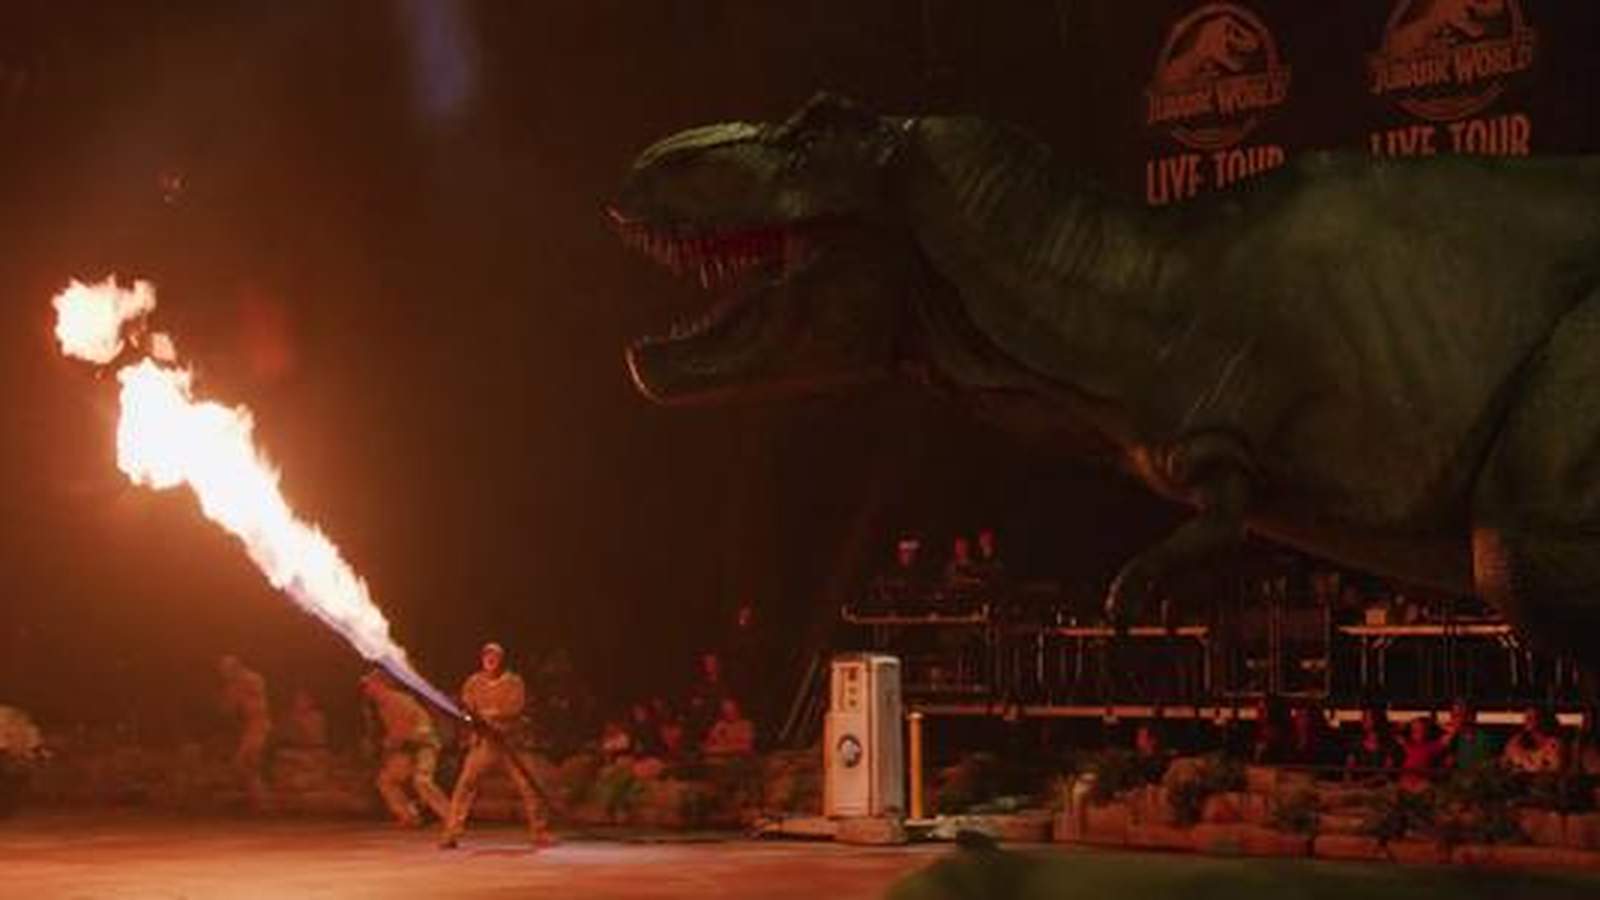 ‘It was nuts:’ ‘Jurassic World Live Tour’ actors speak about new show making grand entrance in Orlando